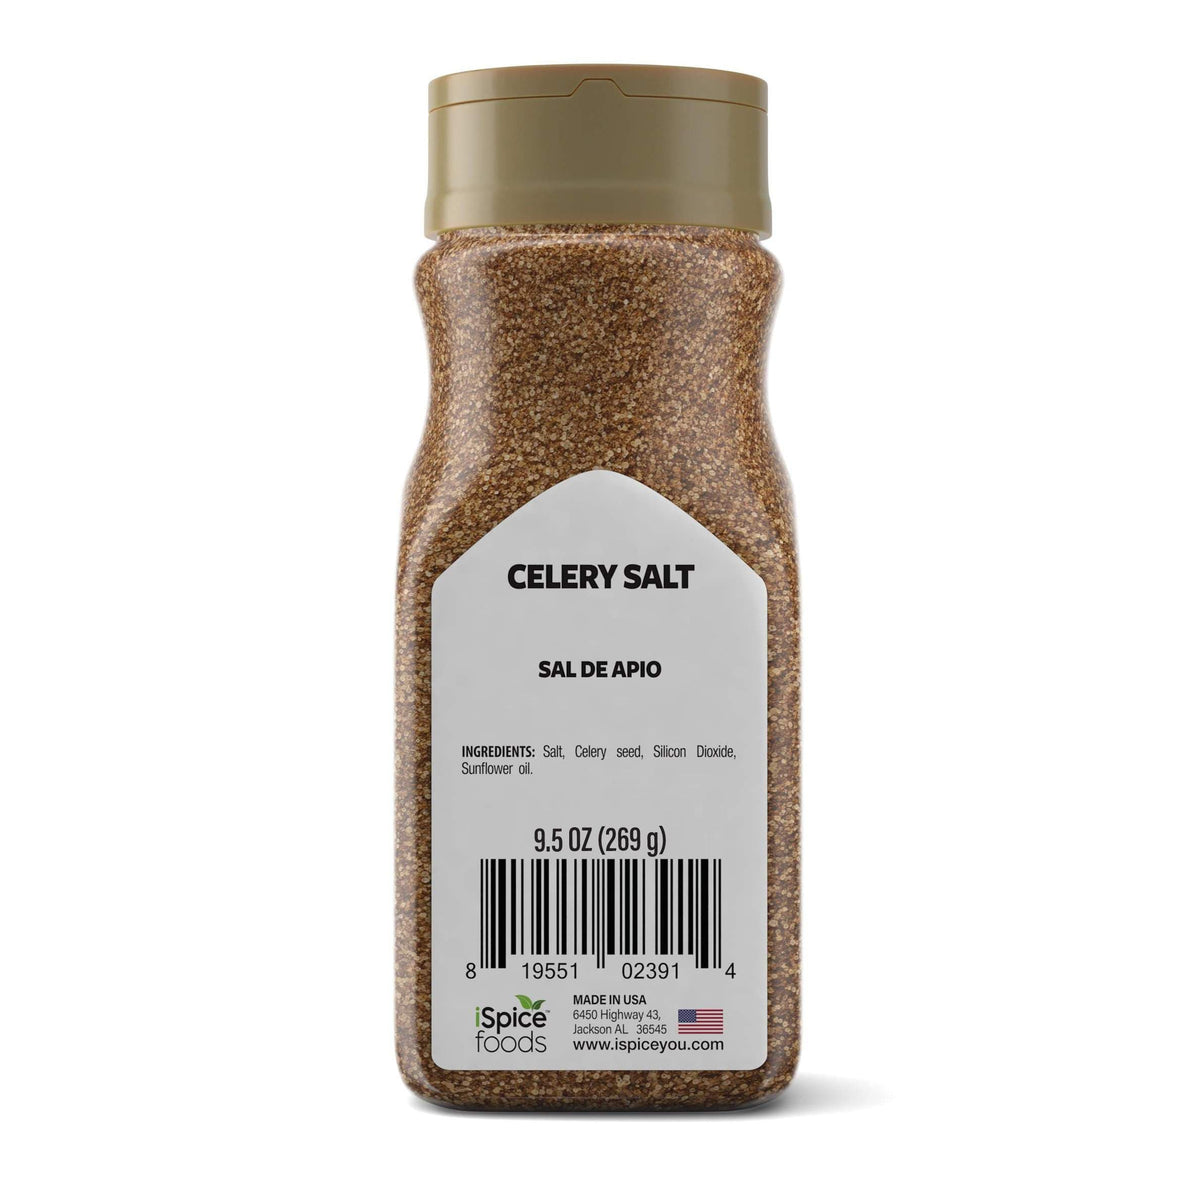 From Where to Buy Quality Celery Salt?